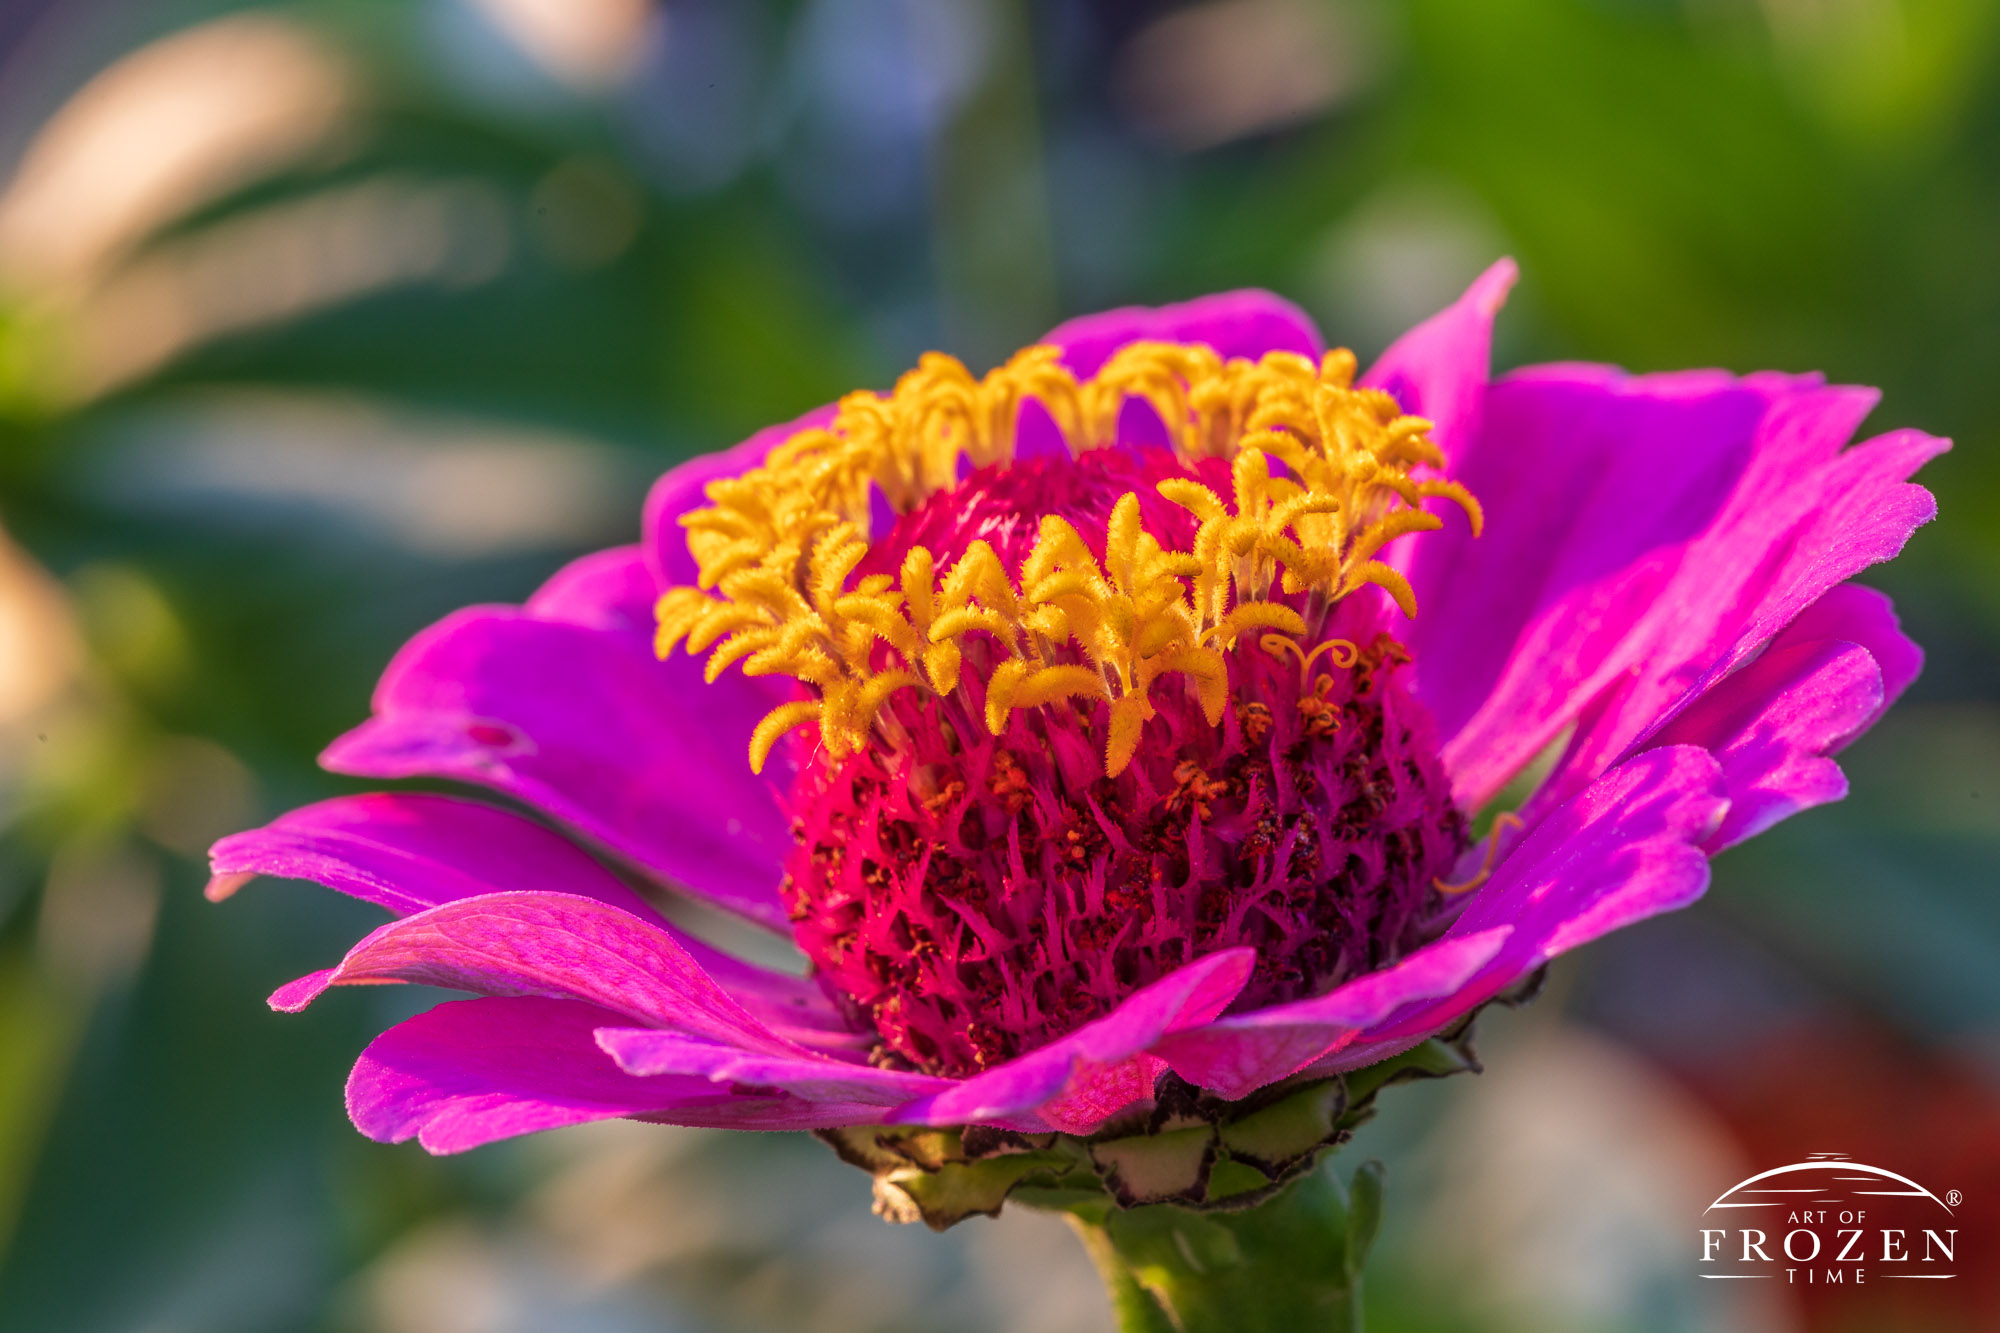 A close view of Zinnia Elegans which shows its pink petals and yellow seeds as the evening sun sidelights the flower in golden light